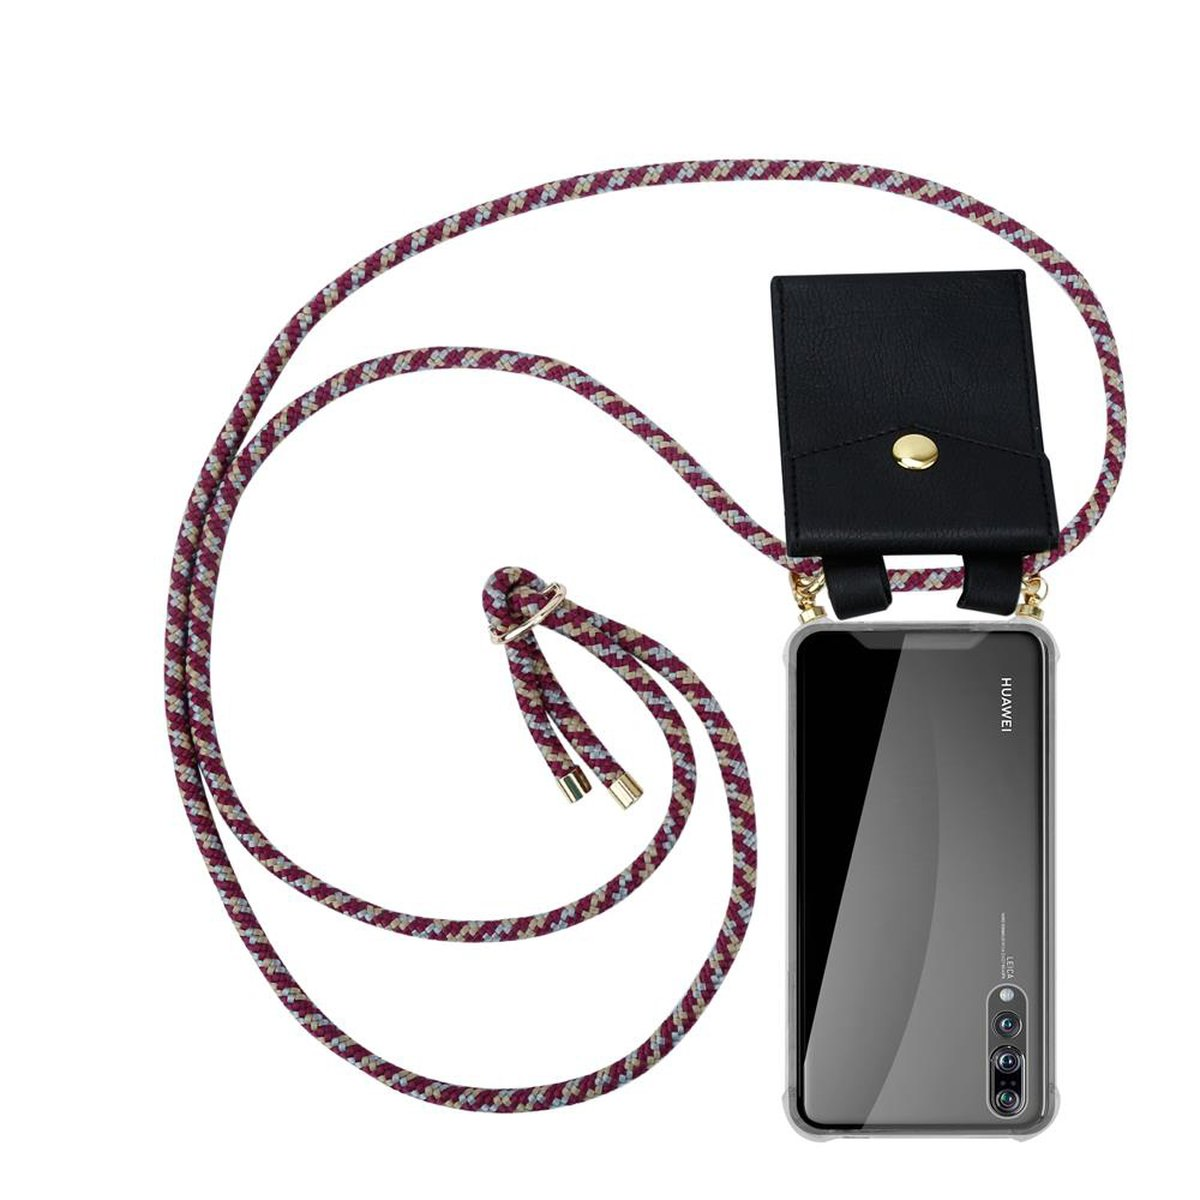 CADORABO Handy Kette mit abnehmbarer P20 P20 und PLUS, / Band PRO GELB Gold Ringen, Hülle, WEIß Kordel Huawei, ROT Backcover